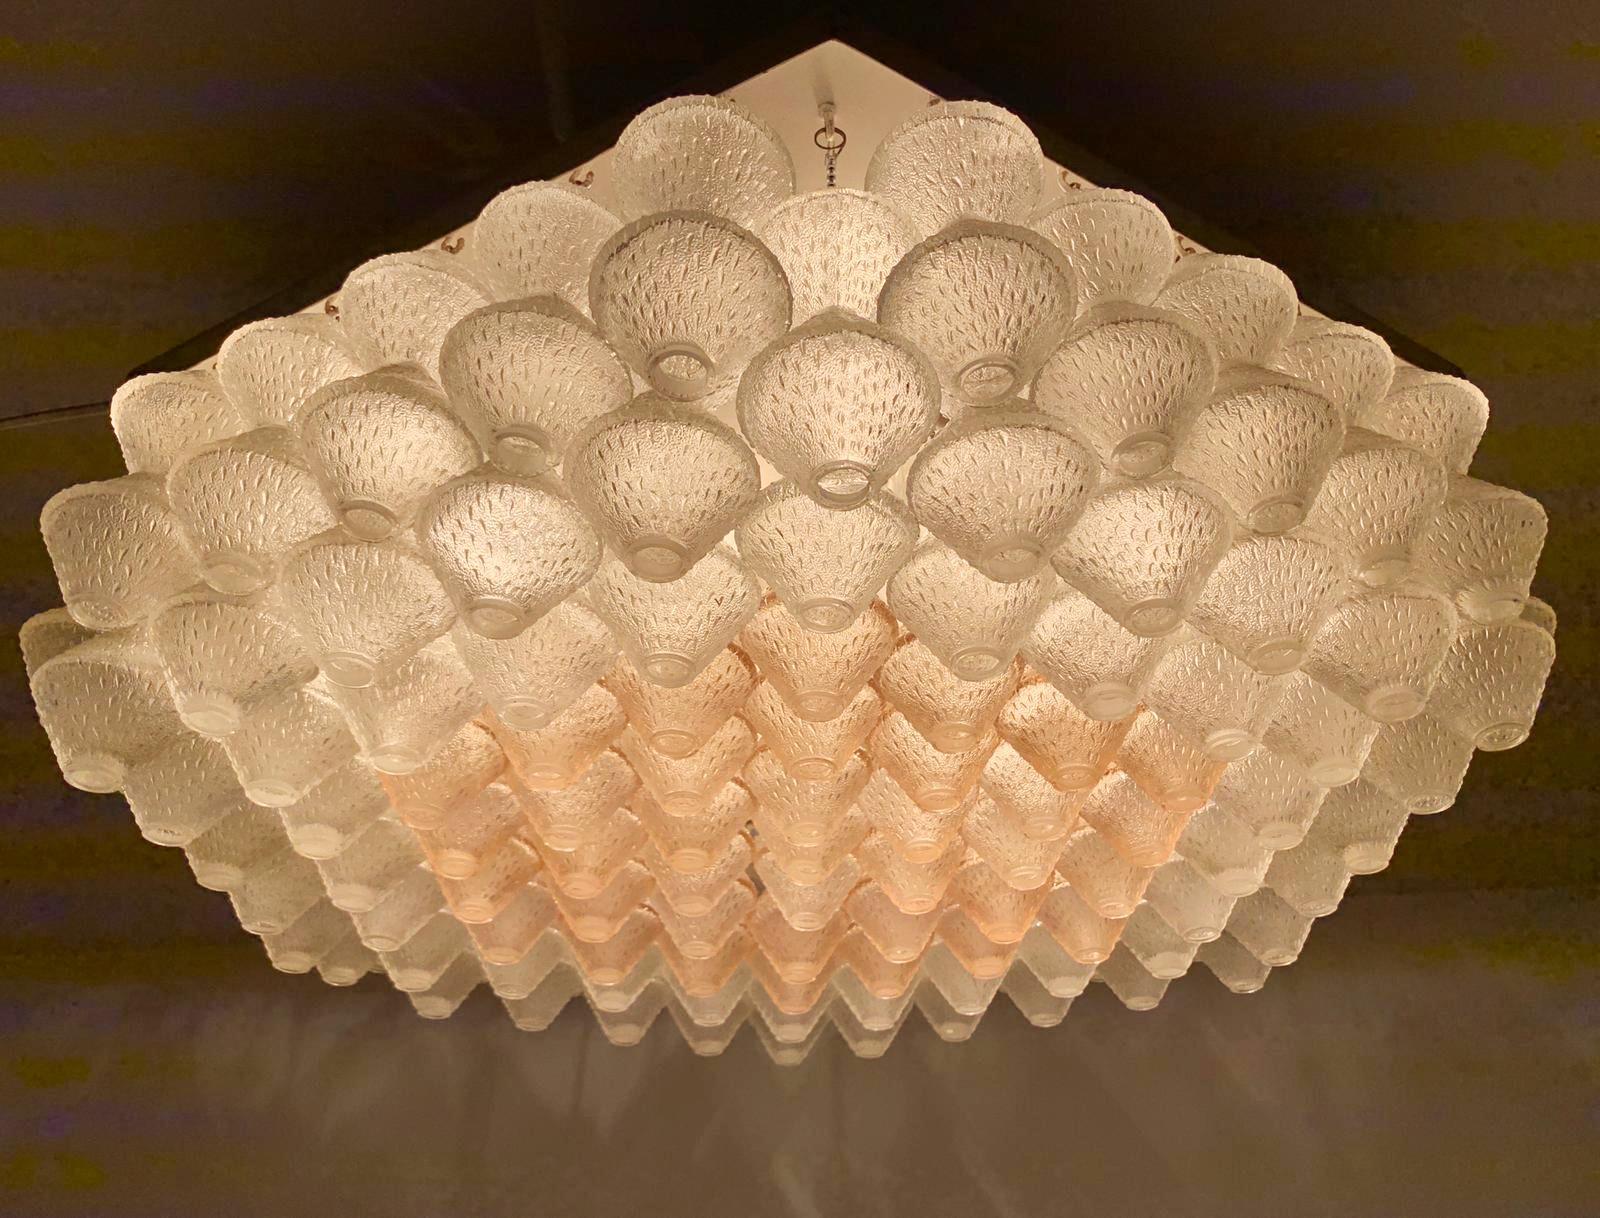 Vintage Italian flush mount with clear and pink textured Murano glass elements suspended on white frame / Made in Italy by Venini, circa 1960s
Measures: diagonal distance 27.5 inches, side width 16 inches, height 8 inches
10 lights / E12 or E14 type